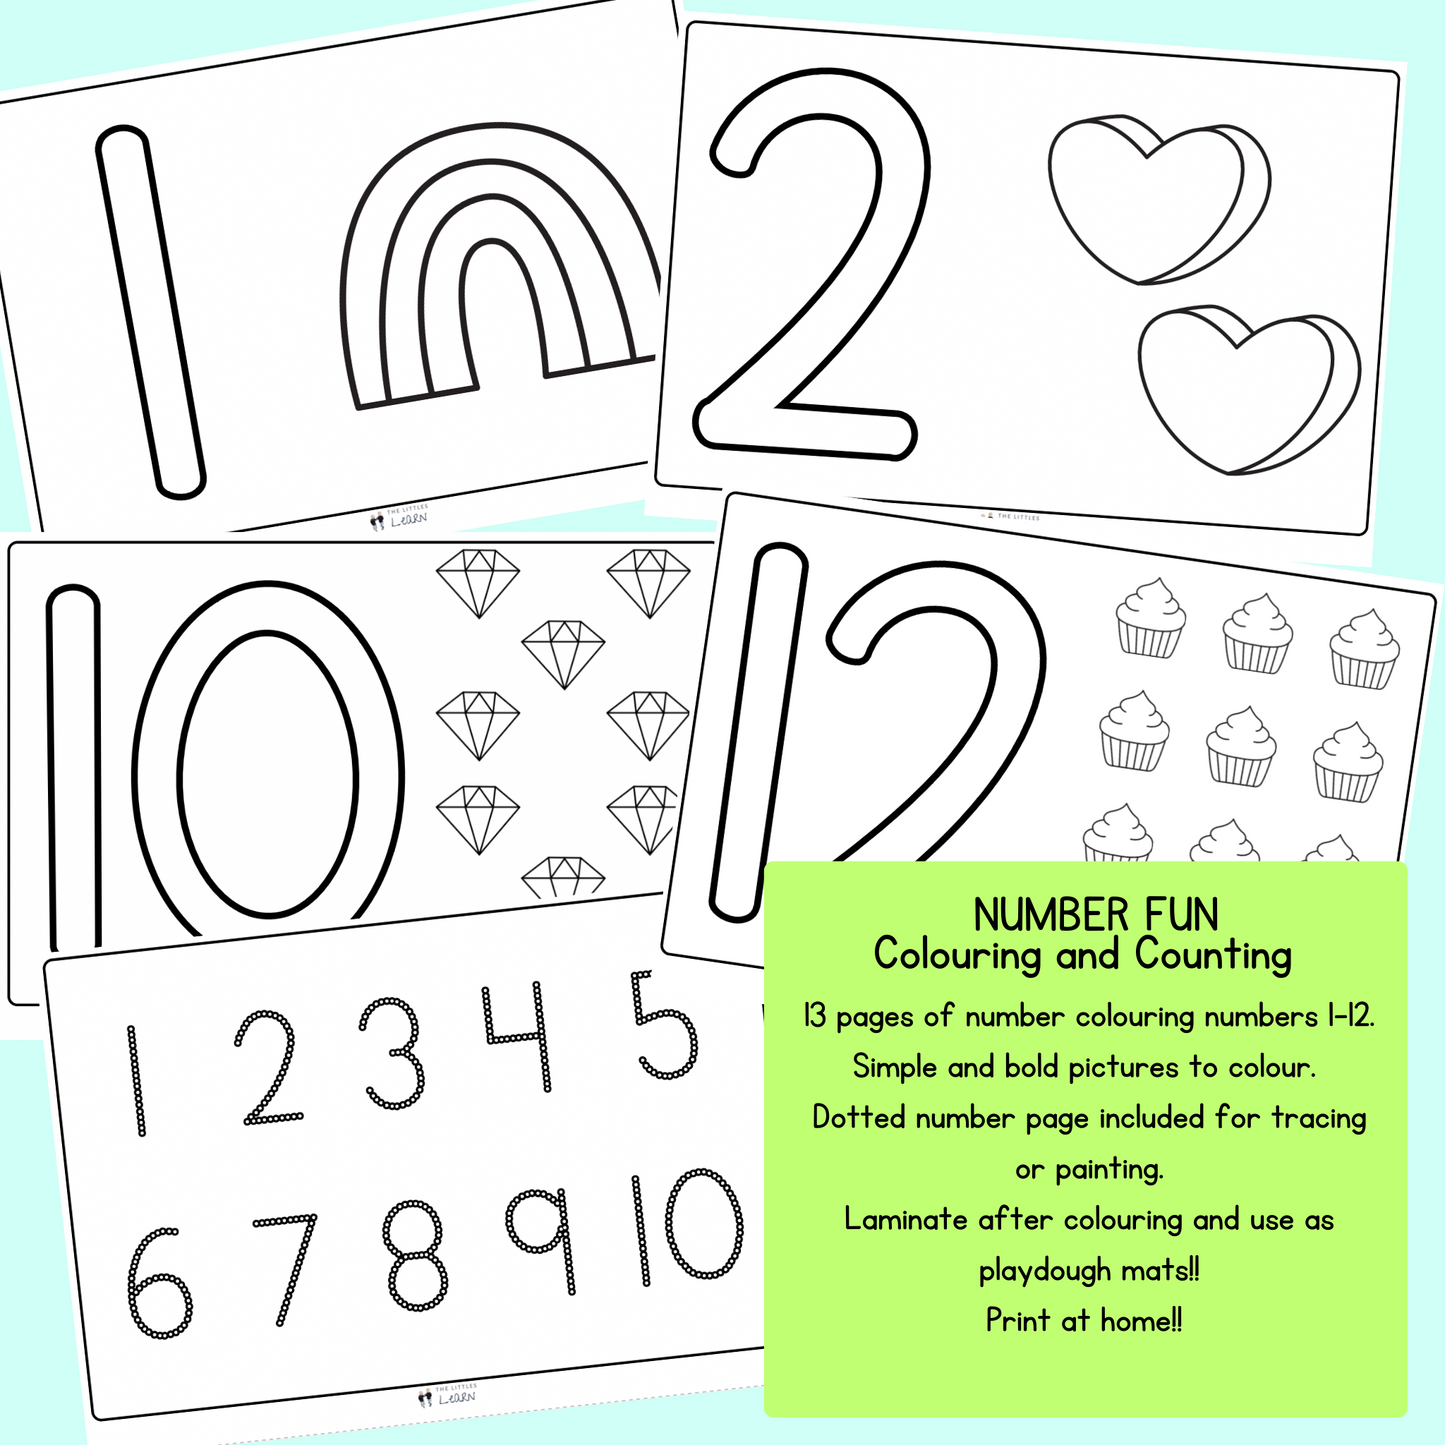 Pages featuring bold number to colour in and picture to count and colour, numbers 1-12